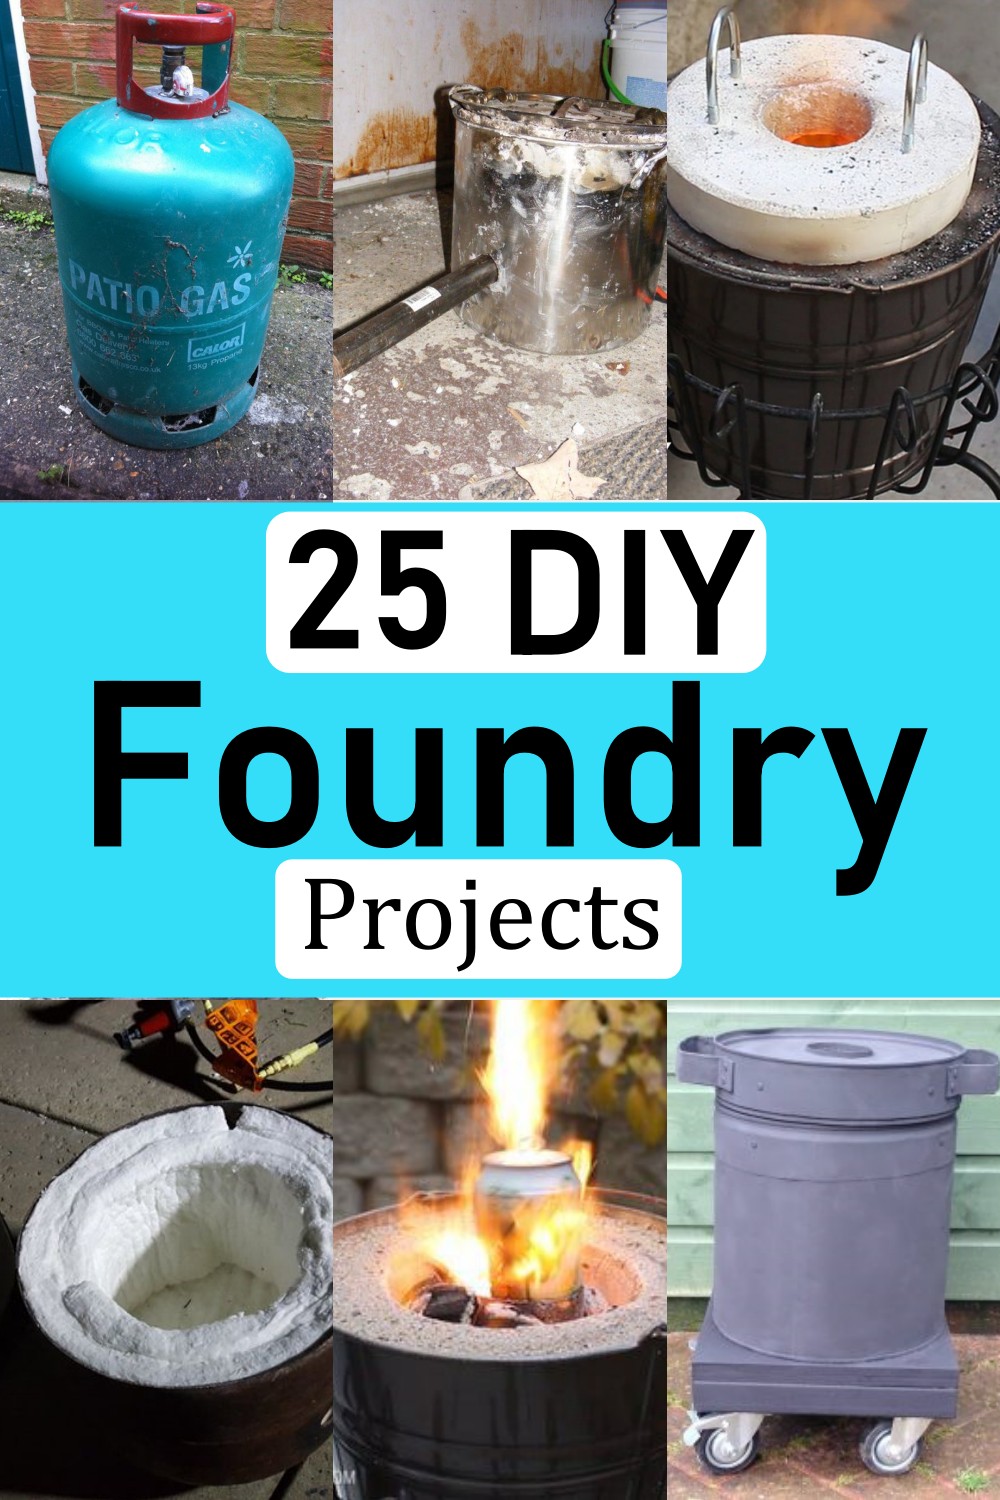 Foundry Projects